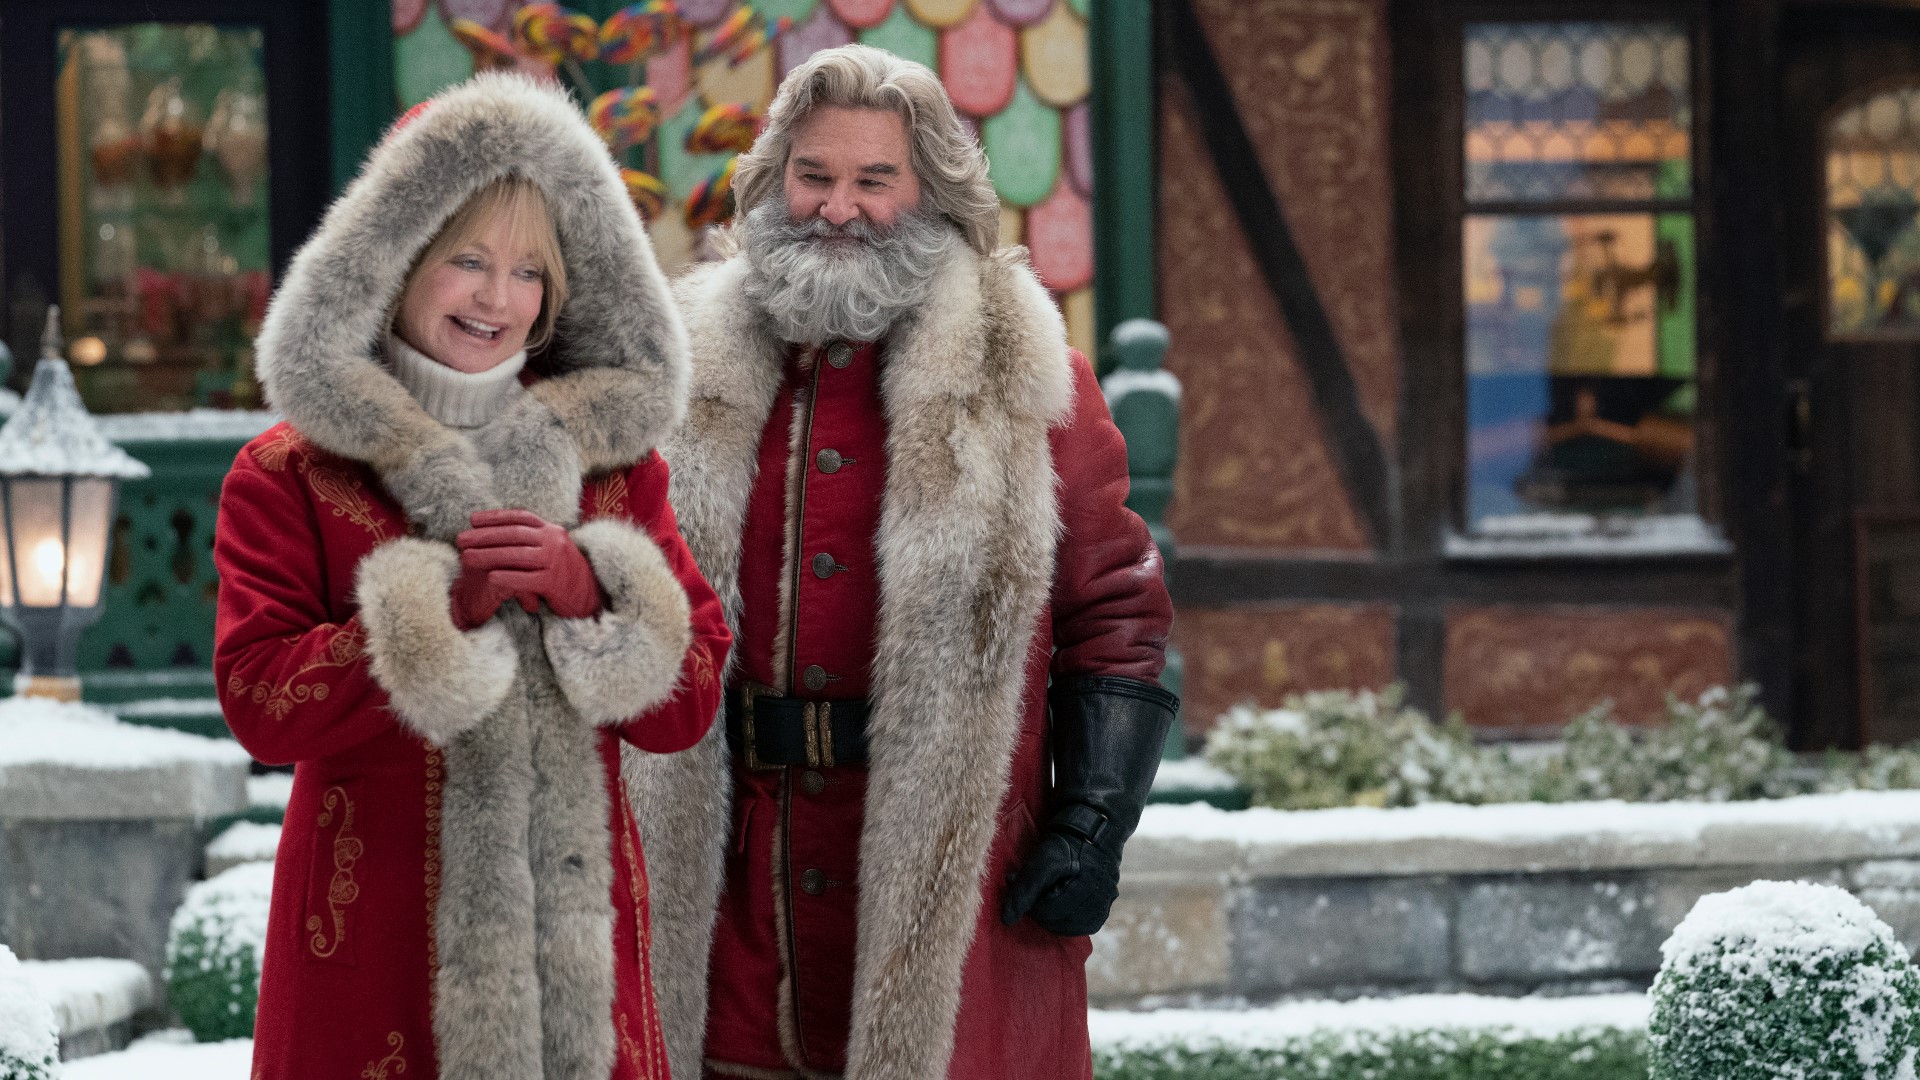 'The Christmas Chronicles: Part Two' debuts on Netflix Nov. 25